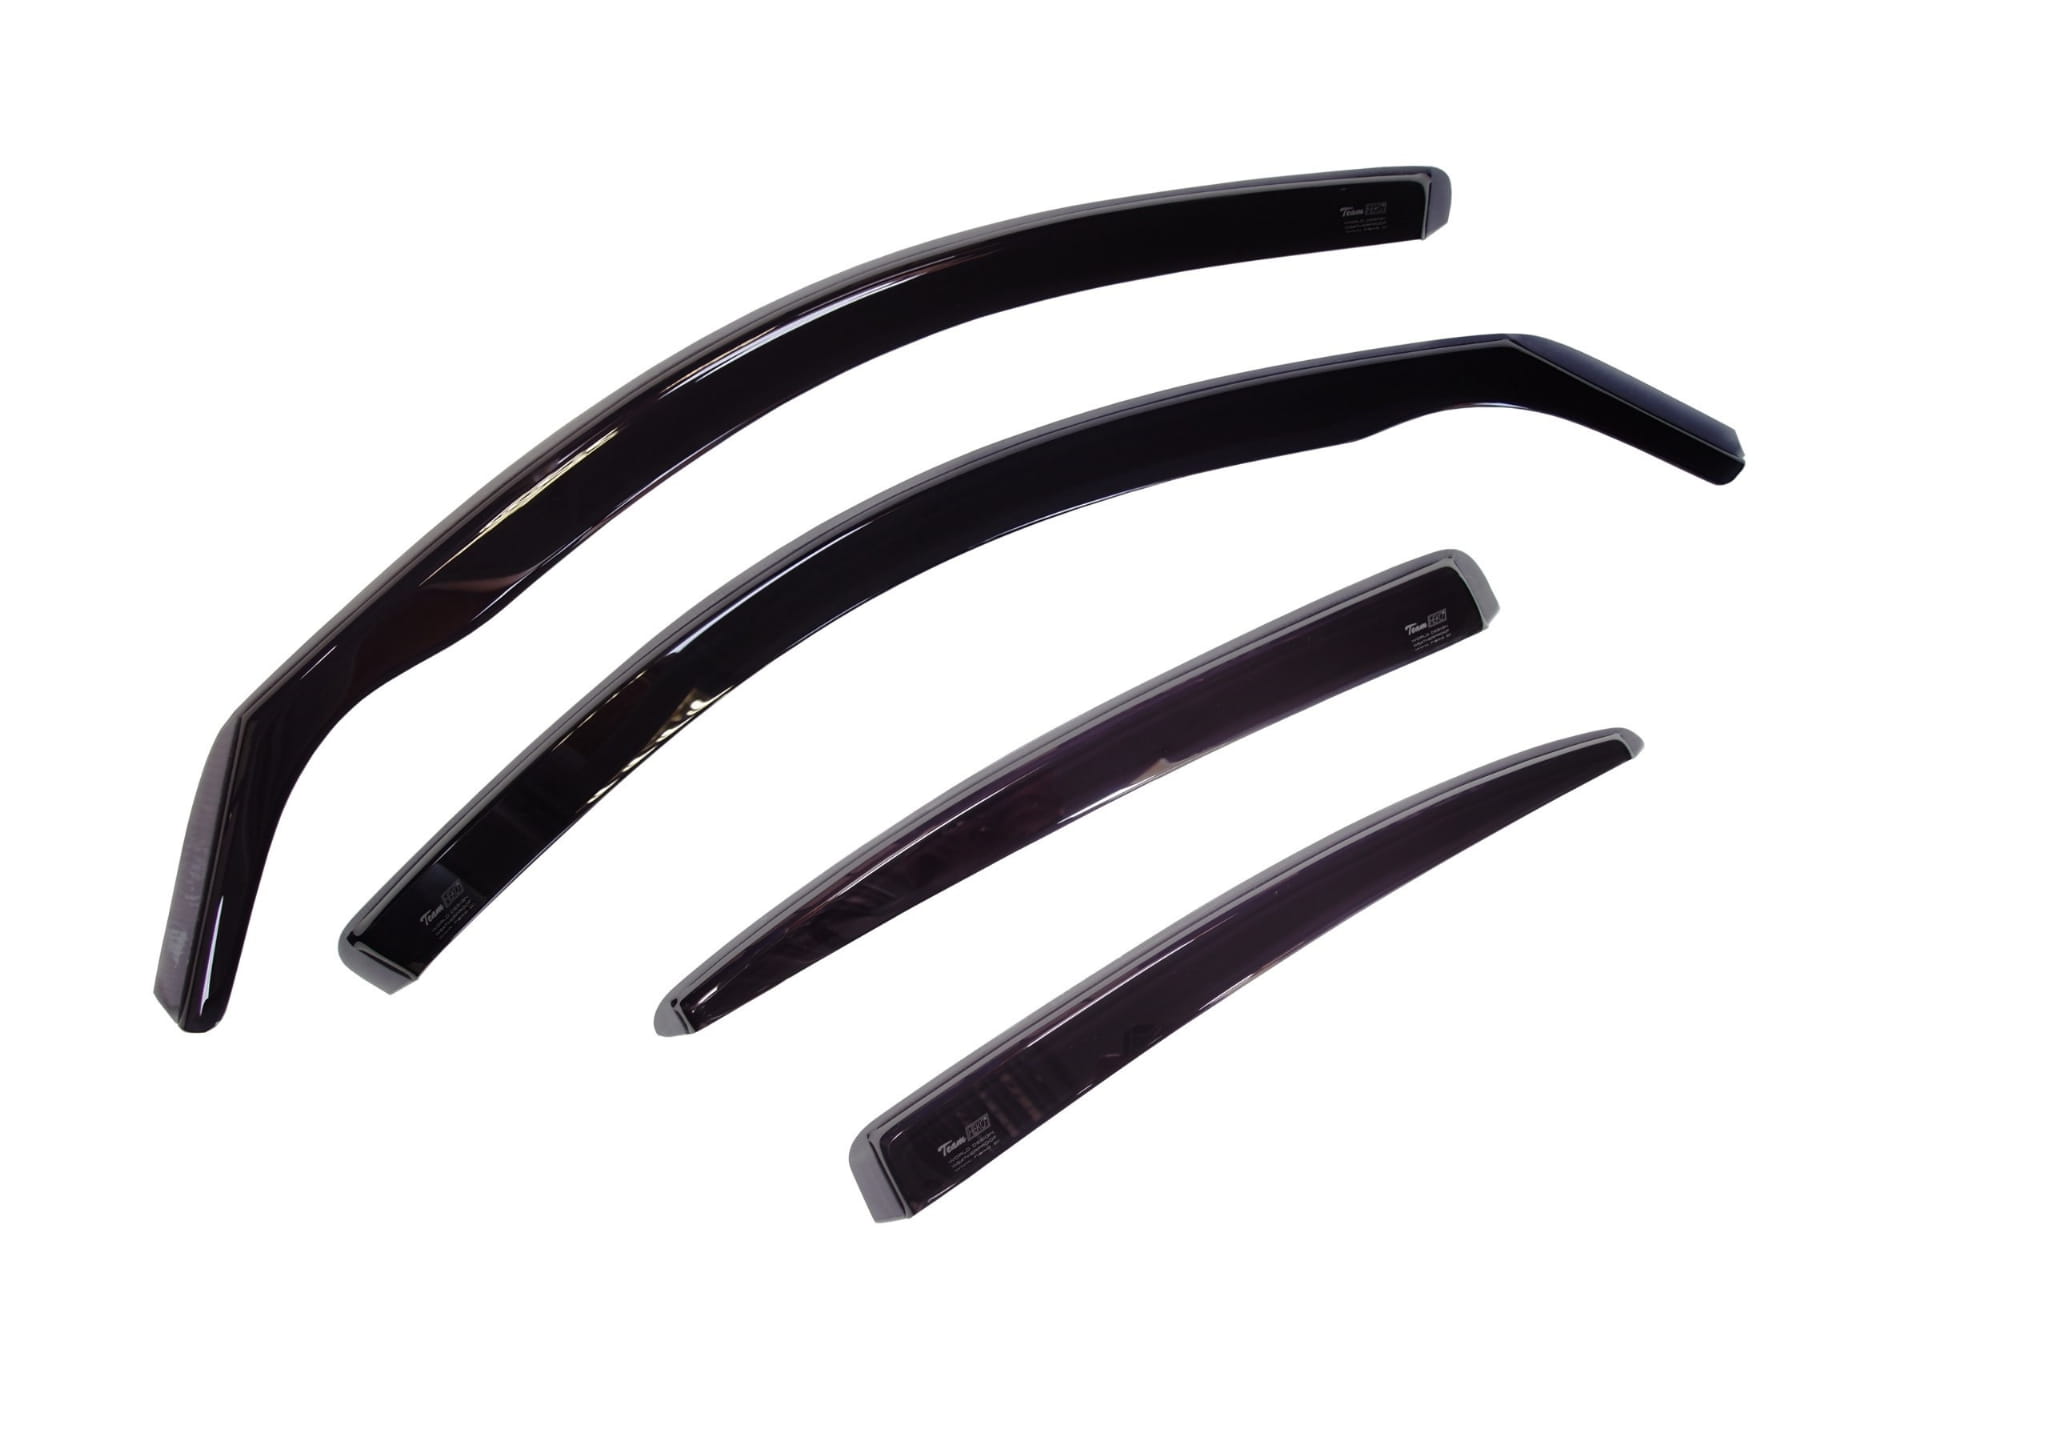 BMW 5 SERIES 2010-2017 4DR TEAM HEKO Wind Deflectors 4PC Set, In the summer wind deflectors help cool the car down and reduce outside noise from an open window when driving.